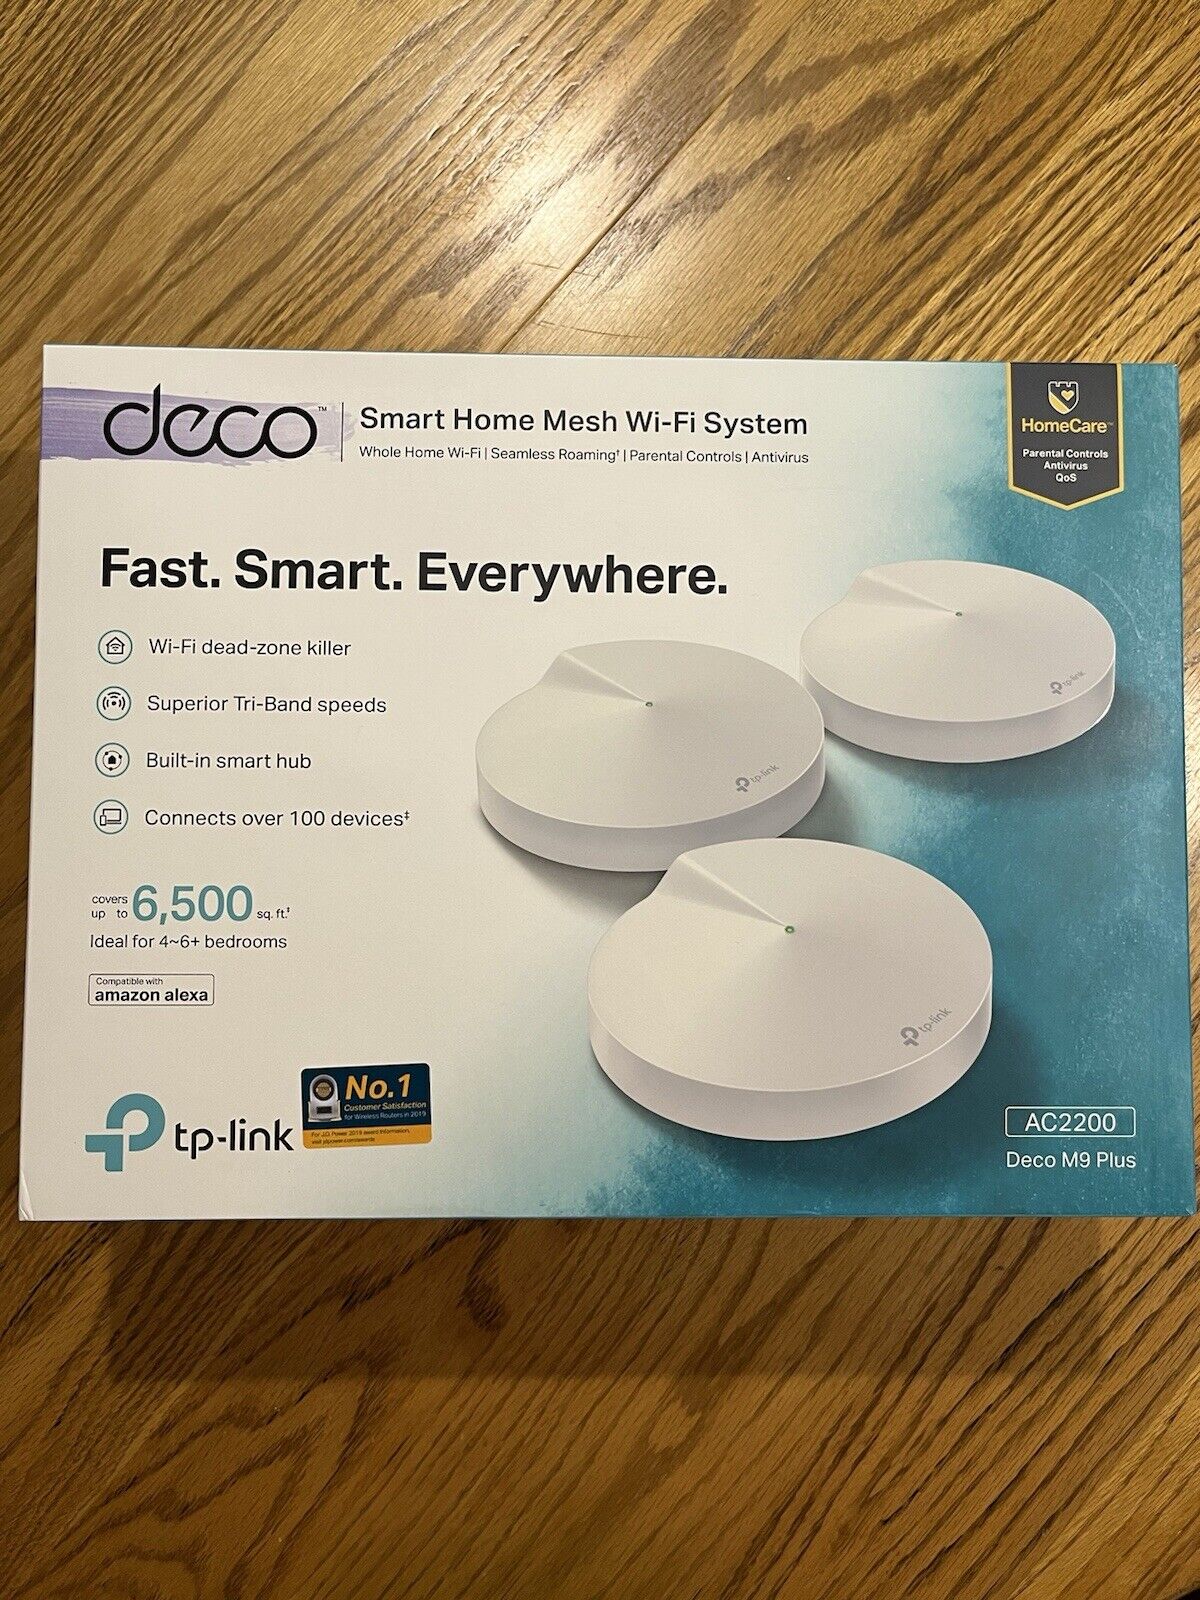 TP-LINK Deco M9 Plus AC2200 Smart Home Mesh Wi-Fi System (3-pack)